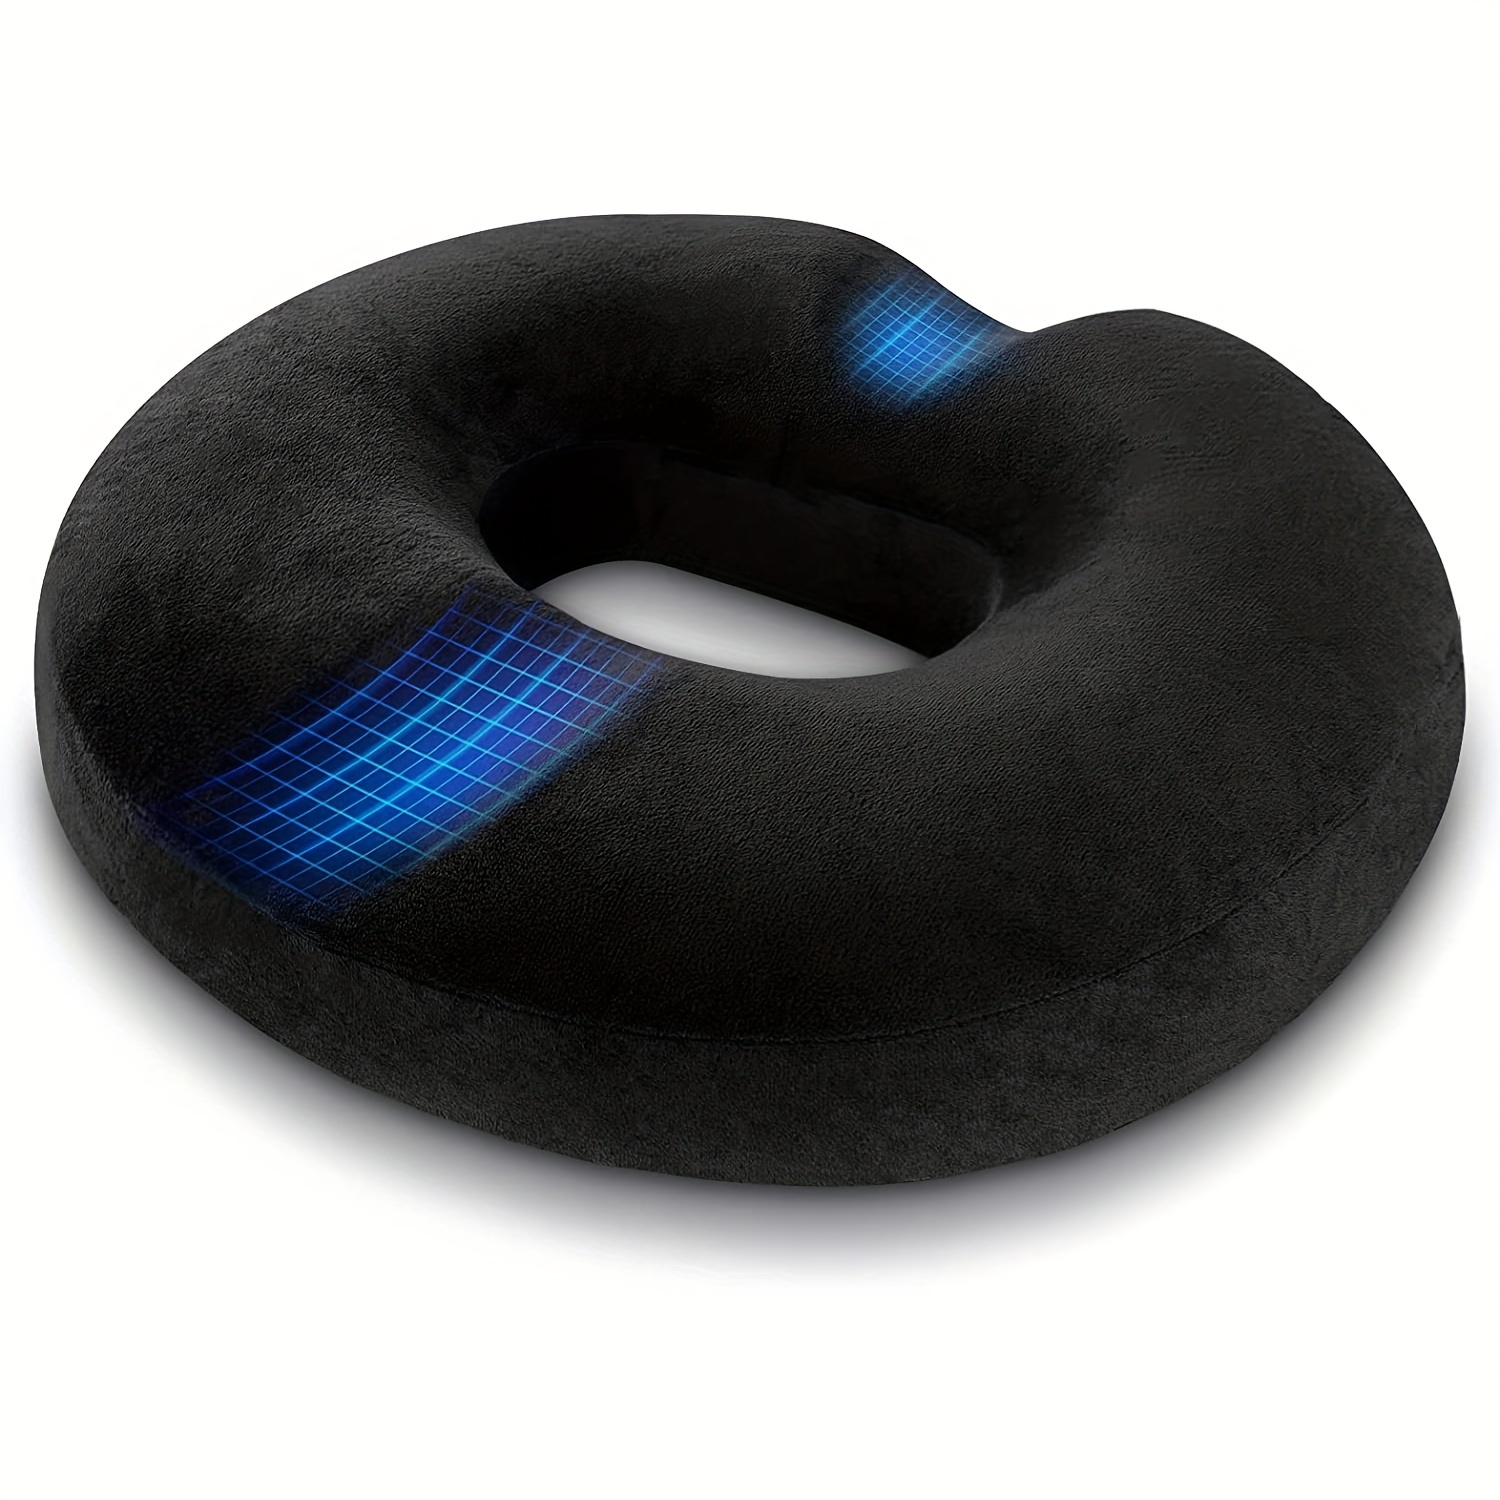 Donut Pillow for Tailbone Pain Relief Cushion for Sitting for